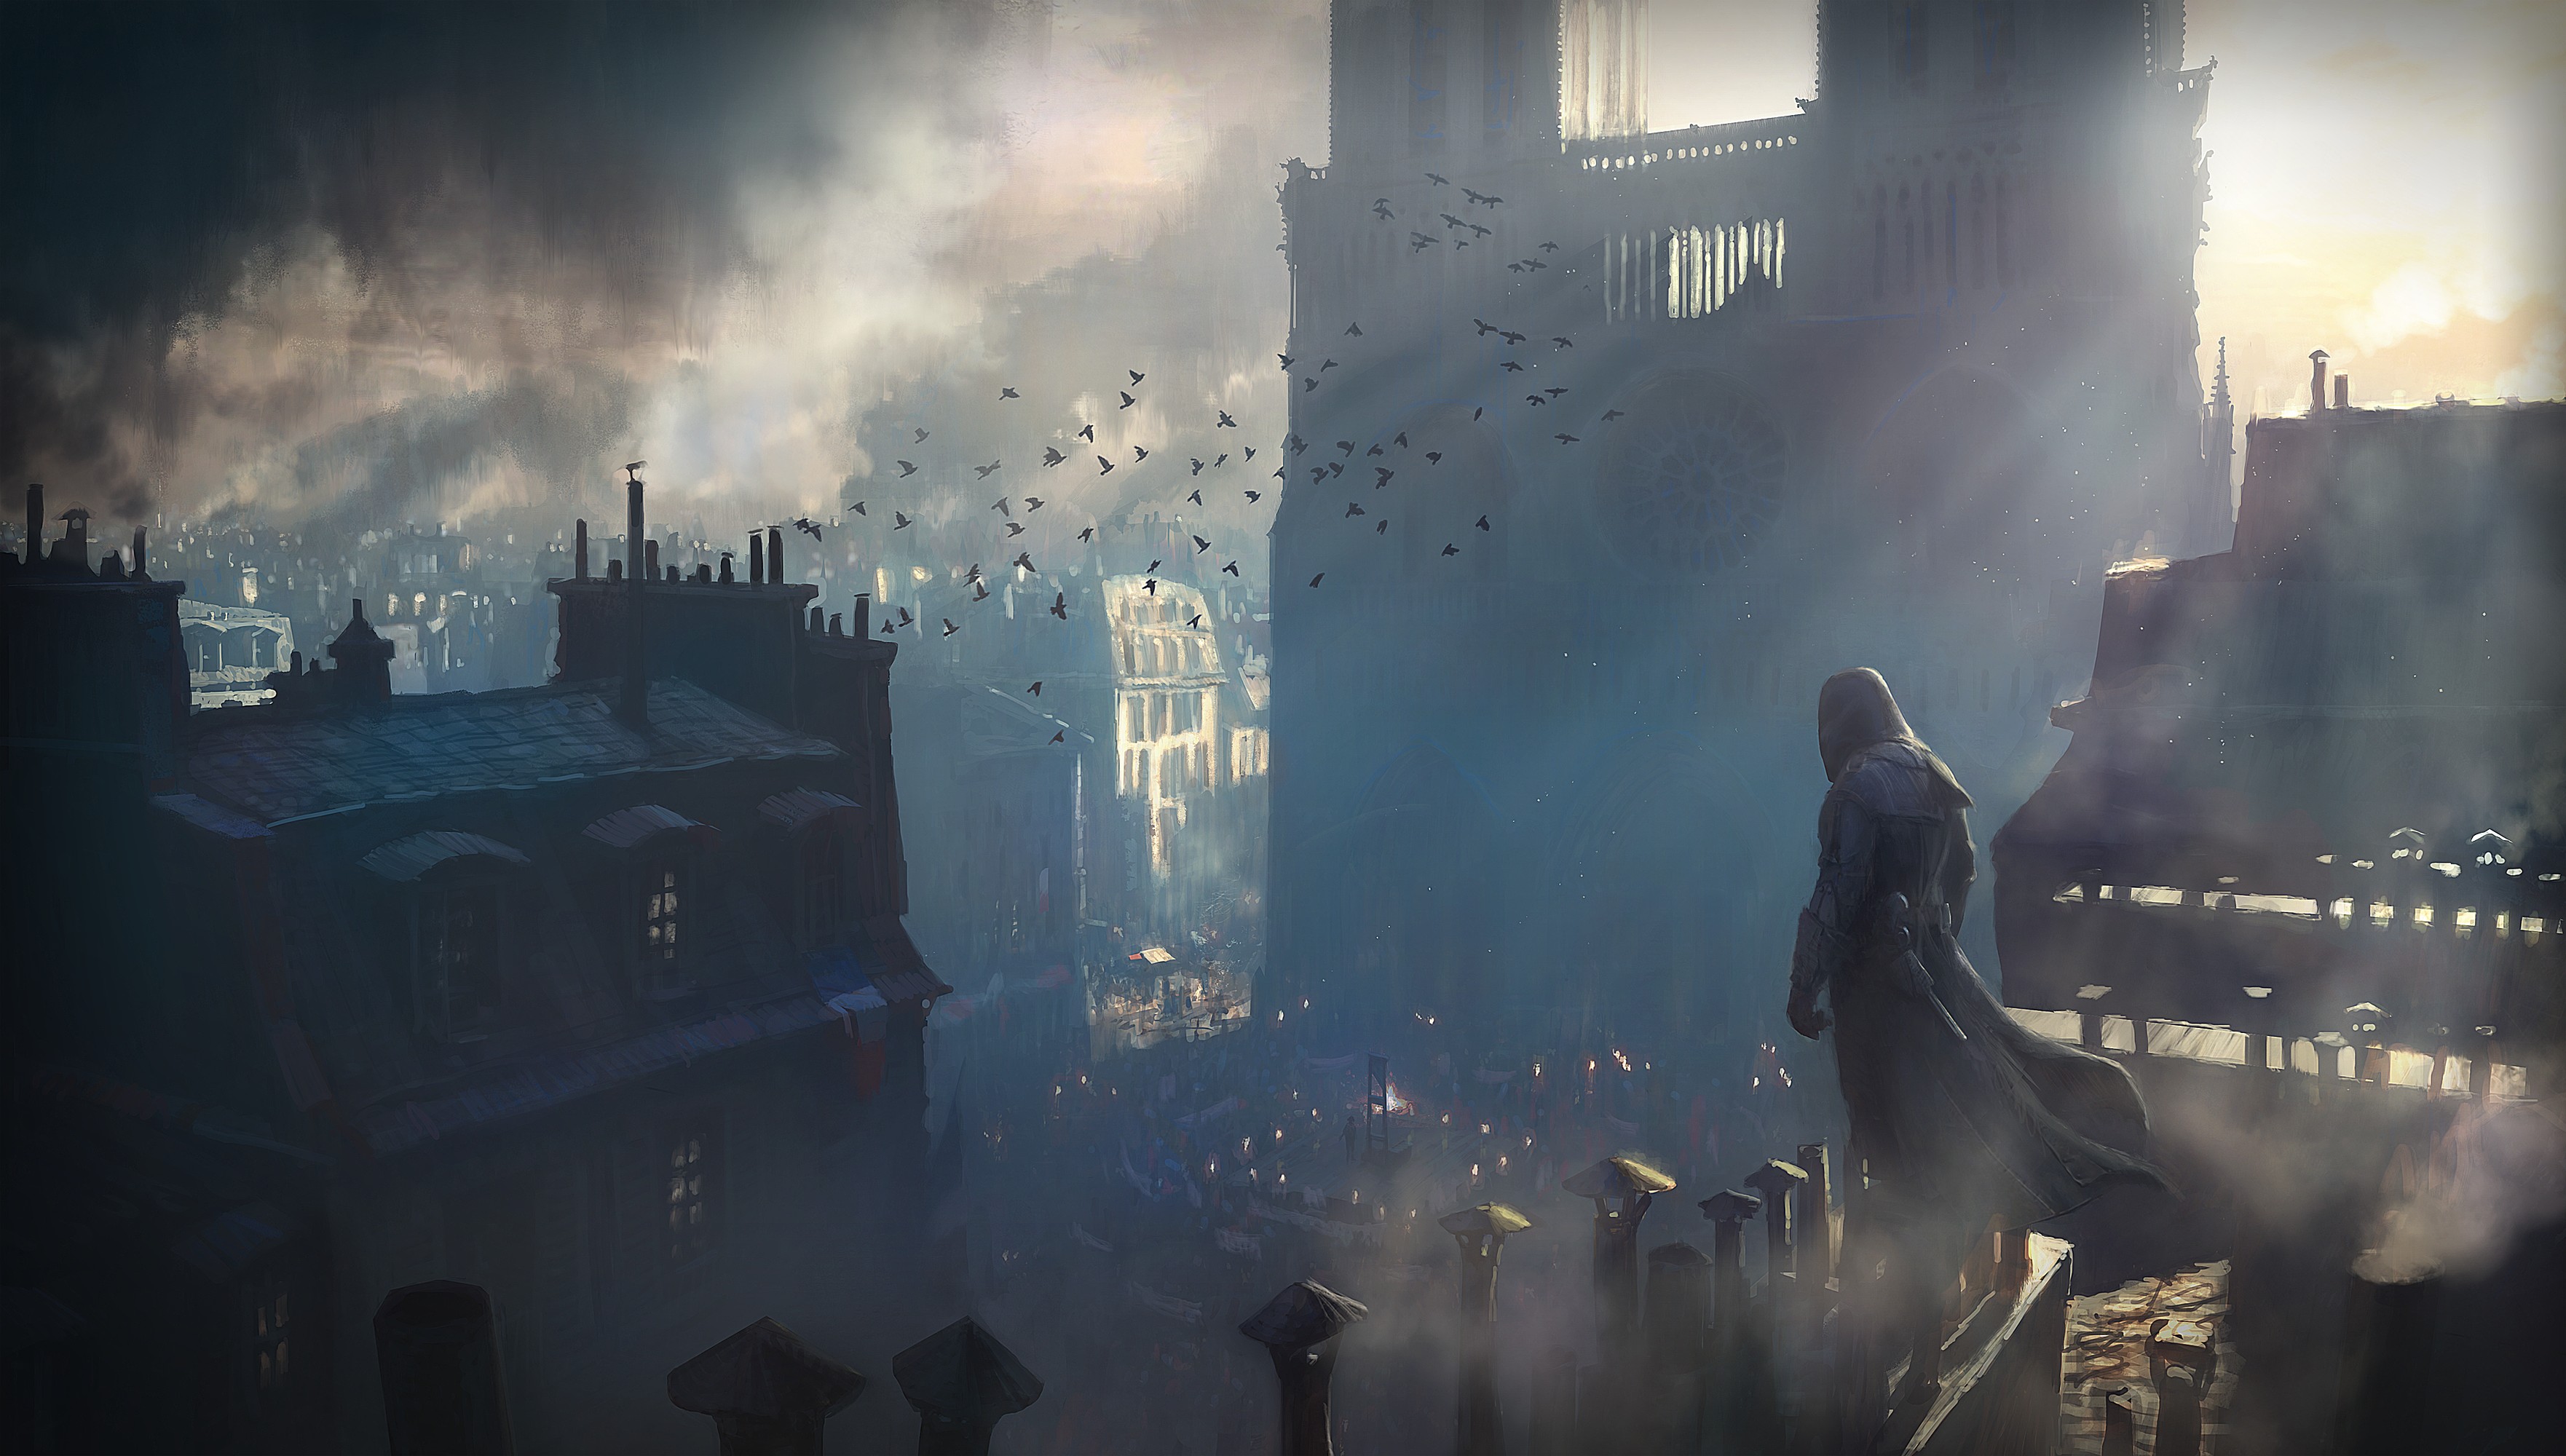 assassin's creed: unity, assassin's creed, video game Image for desktop